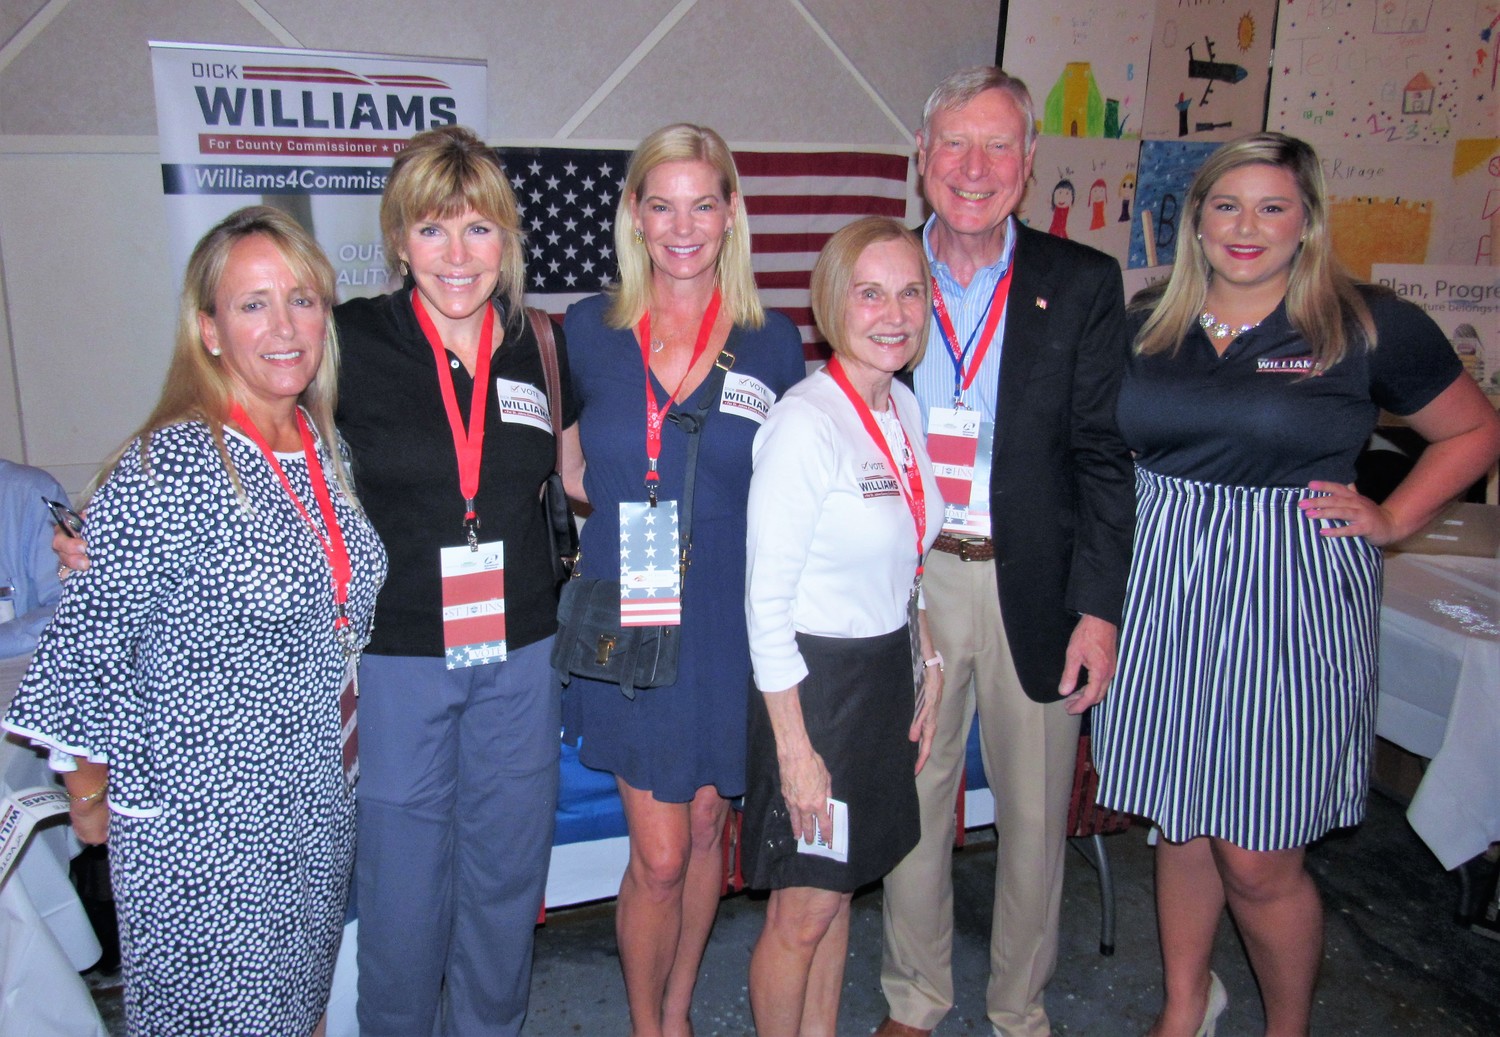 District 4 County Commission candidate Dick Williams (second from right) gathers with Victoria Corlazzoli (from left), Kitty Switkes, Lisa Cook, Linda Williams, Dick Williams and Savannah Sizer.